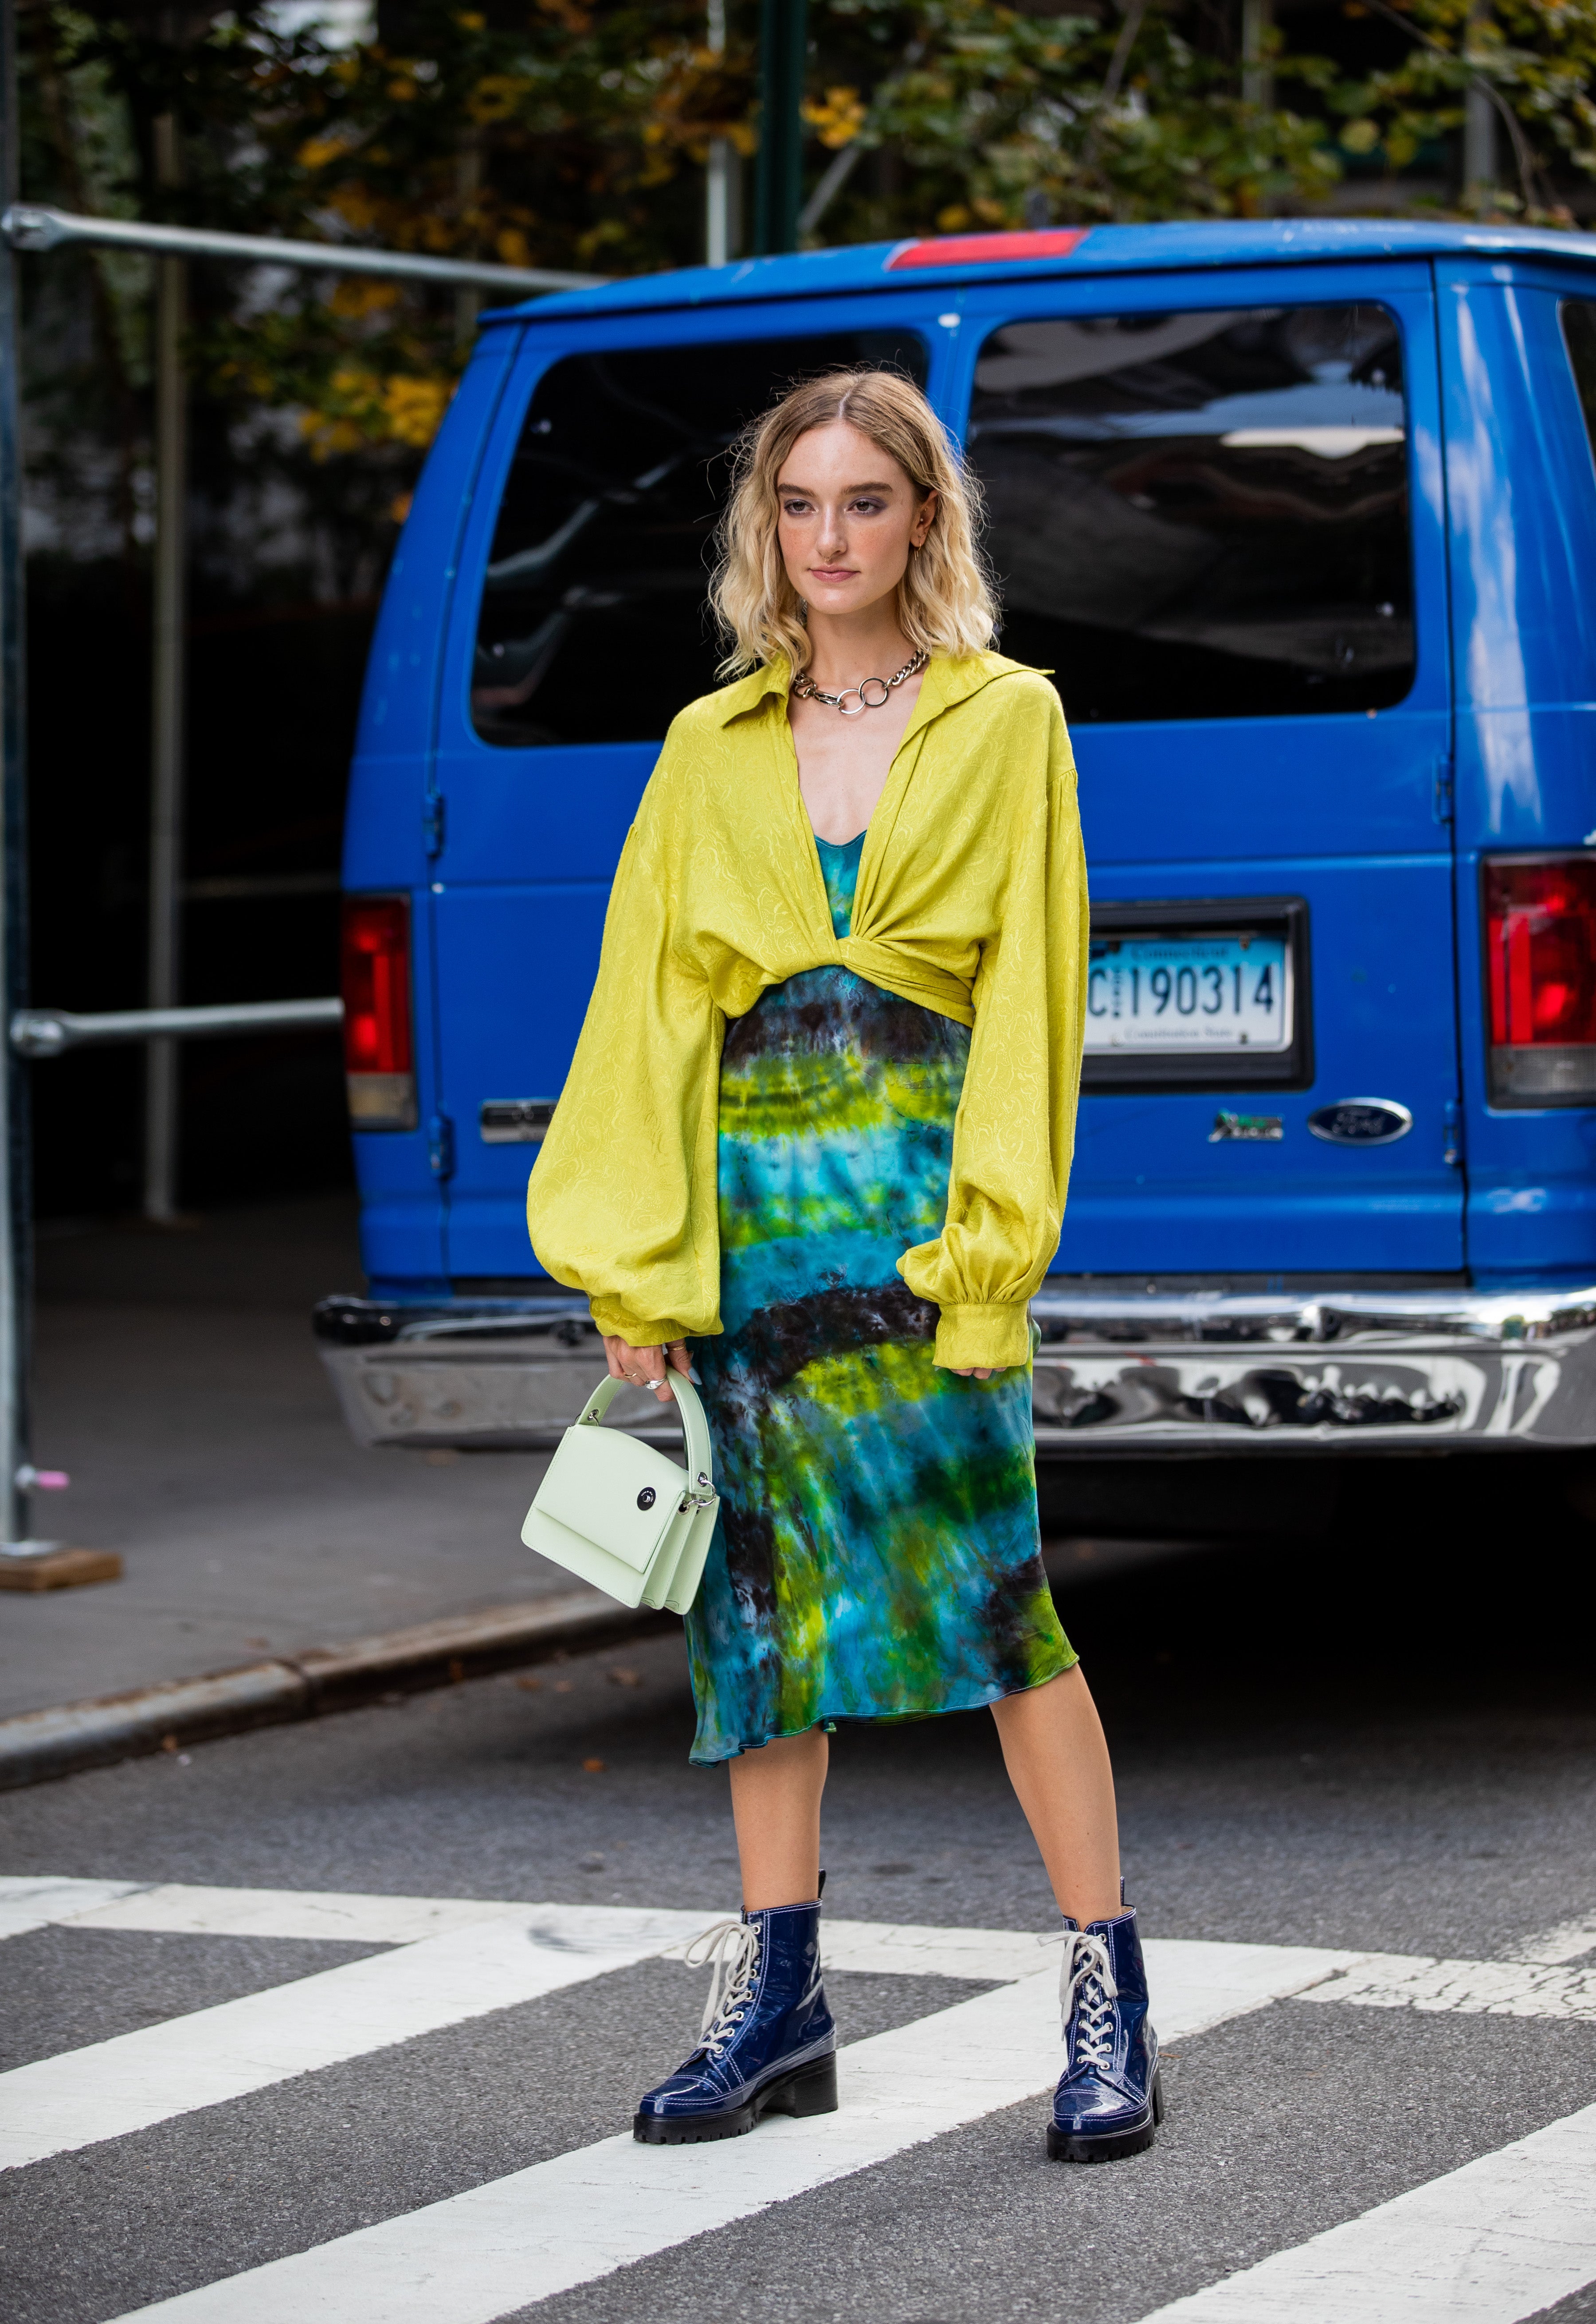 Slime Green Is The Color Trend for Spring 2020